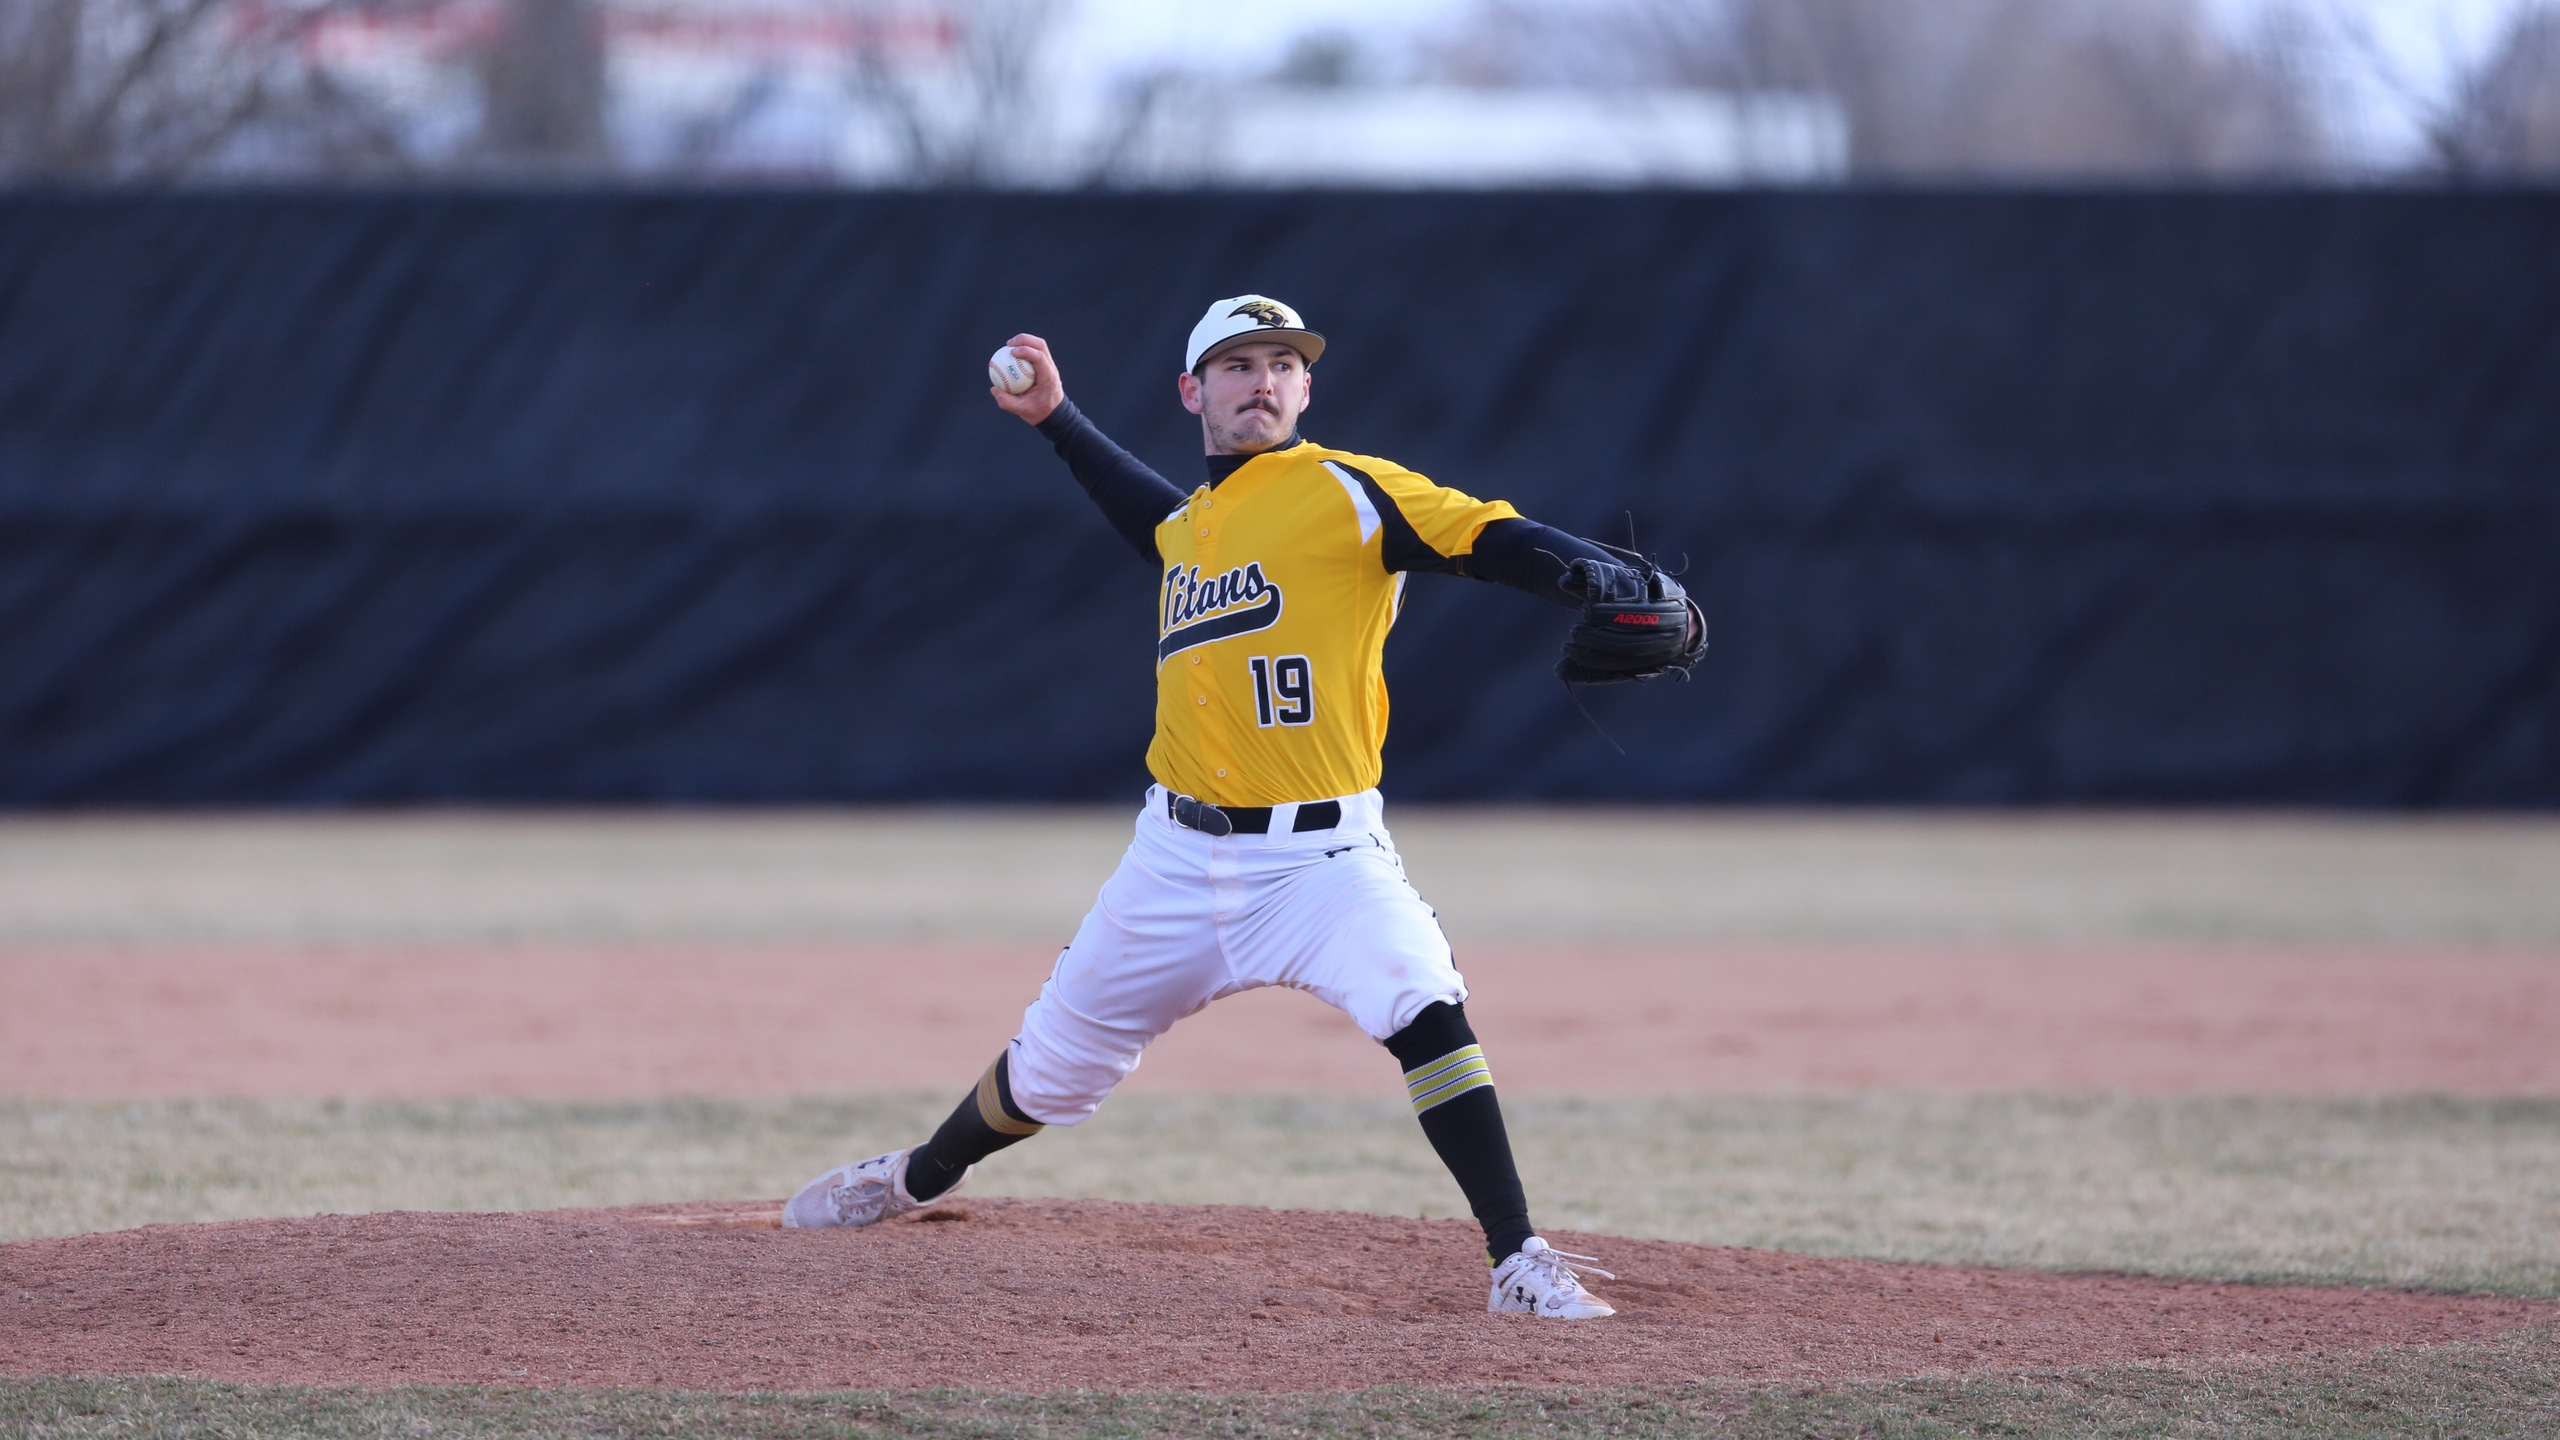 Jarrett Scheelk yielded only one hit through five innings and ended his eight-inning appearance against the Blugolds with nine strikeouts and five hits allowed.